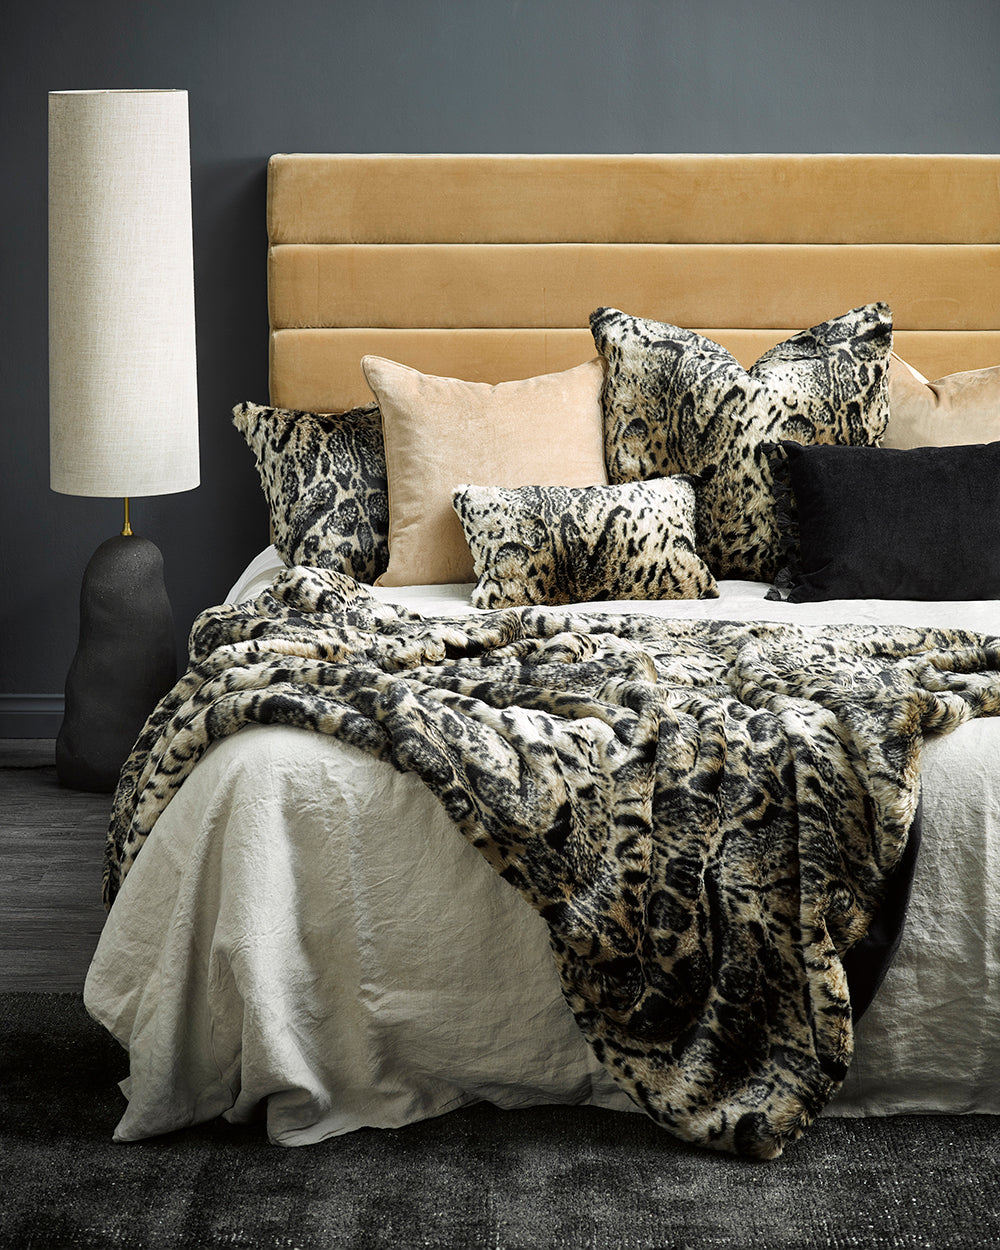 Heirloom African Leopard Throw Rug Blanket in Faux Fur is available from Make Your House A Home Premium Stockist. Furniture Store Bendigo, Victoria. Australia Wide Delivery.